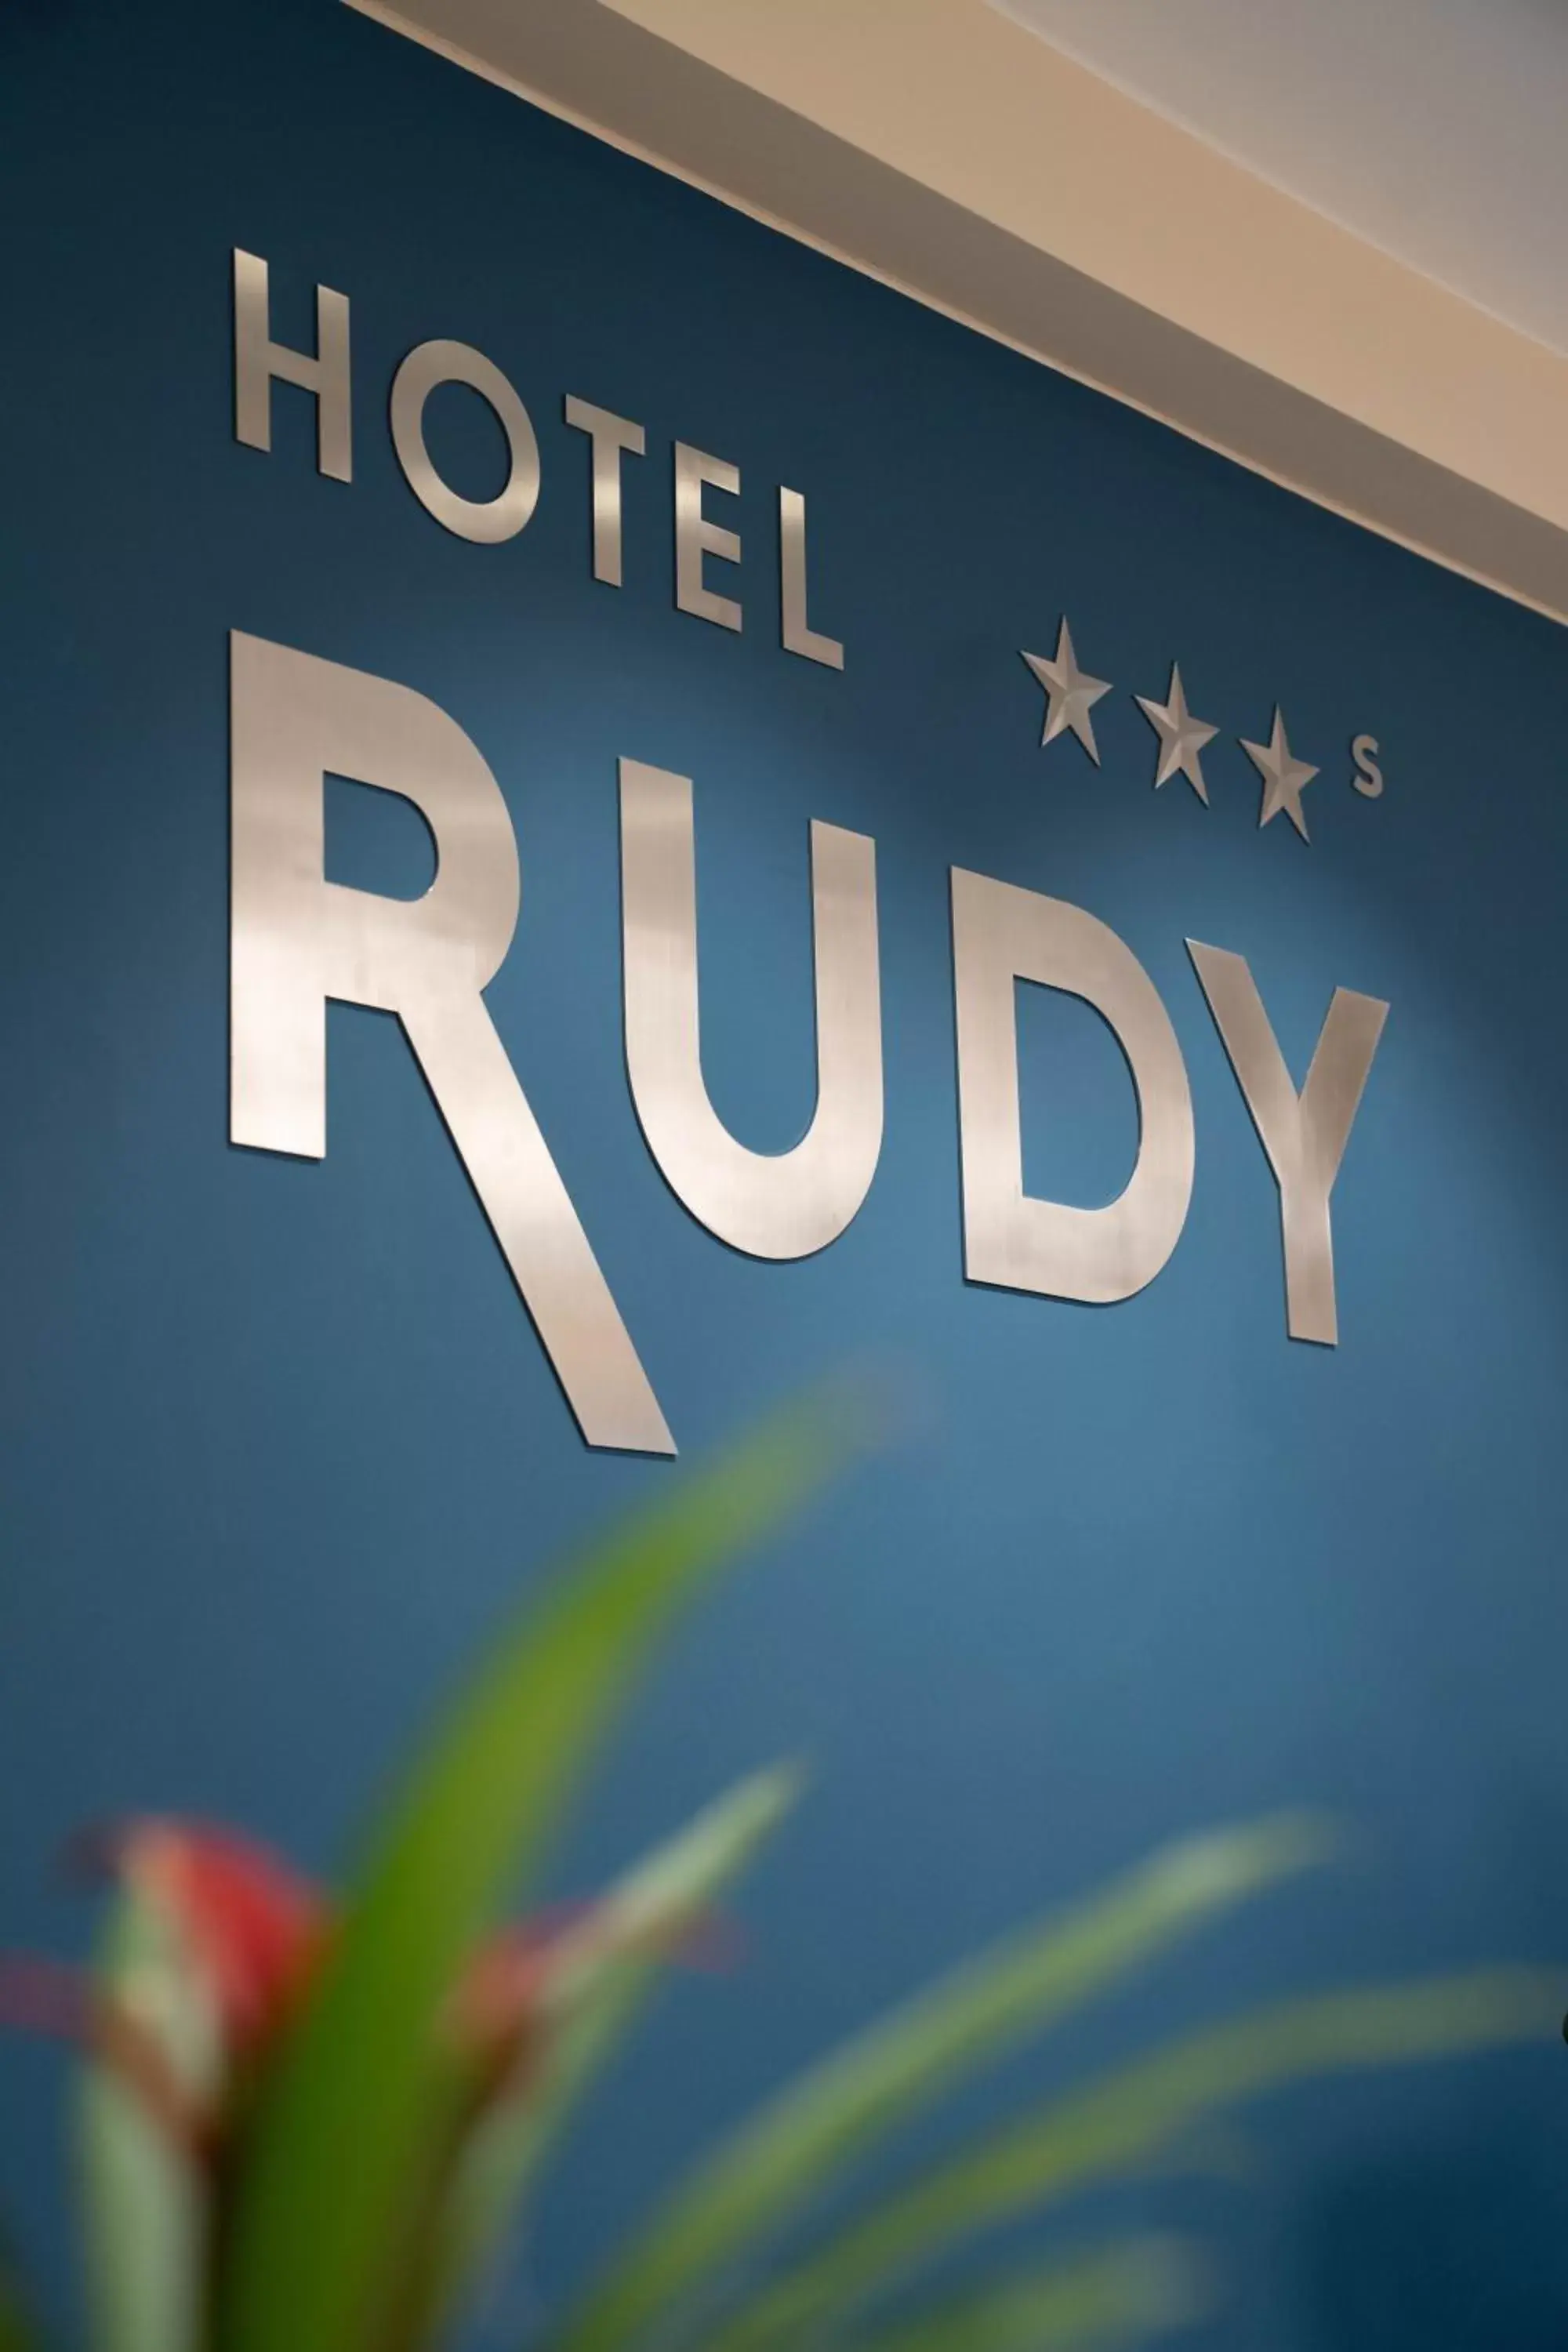 Property logo or sign in Hotel Rudy